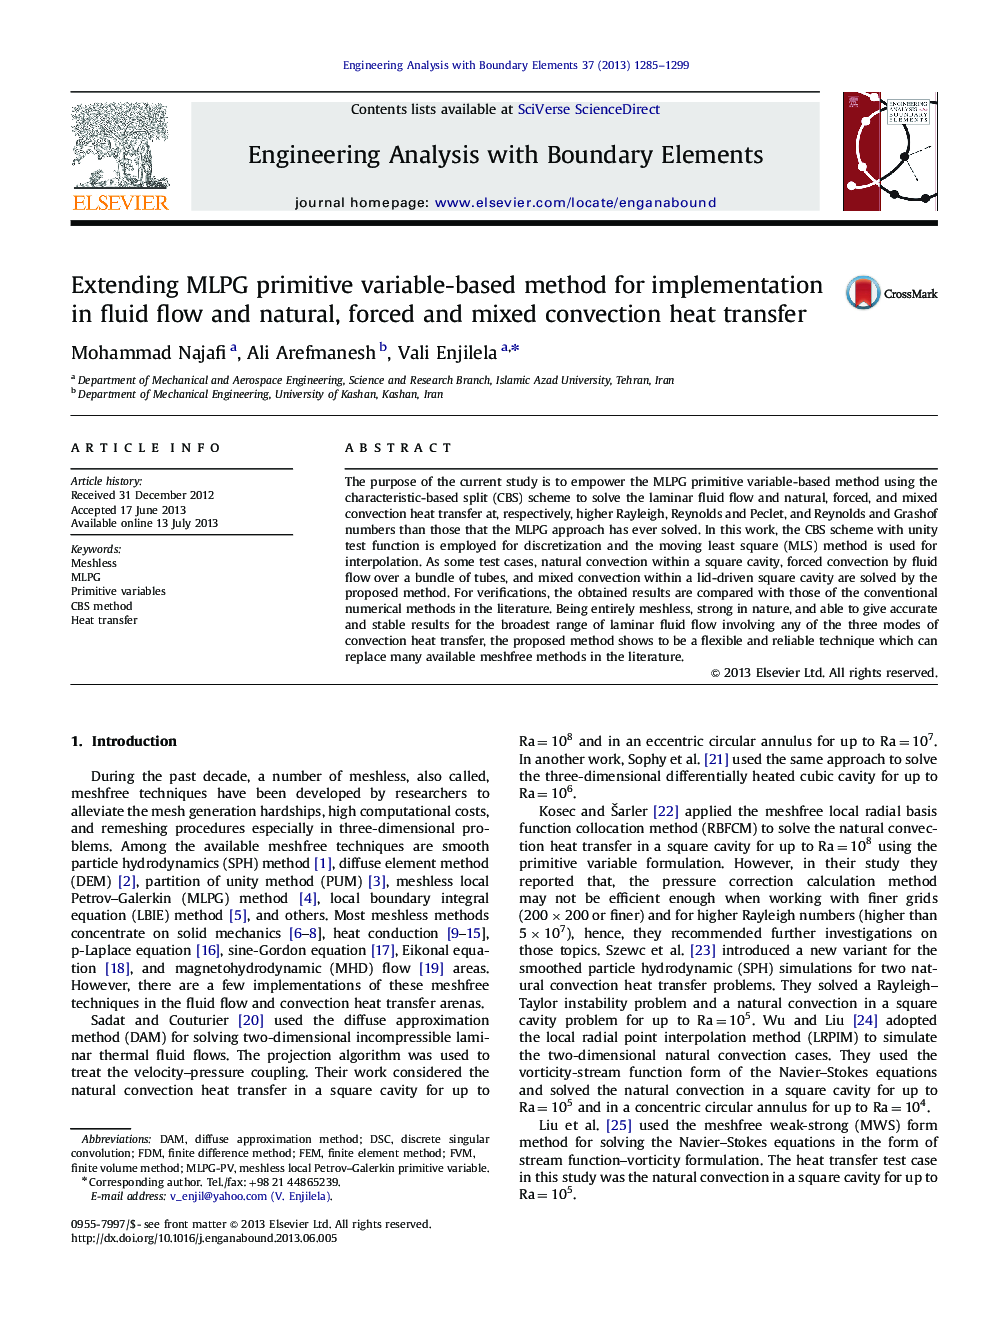 Extending MLPG primitive variable-based method for implementation in fluid flow and natural, forced and mixed convection heat transfer